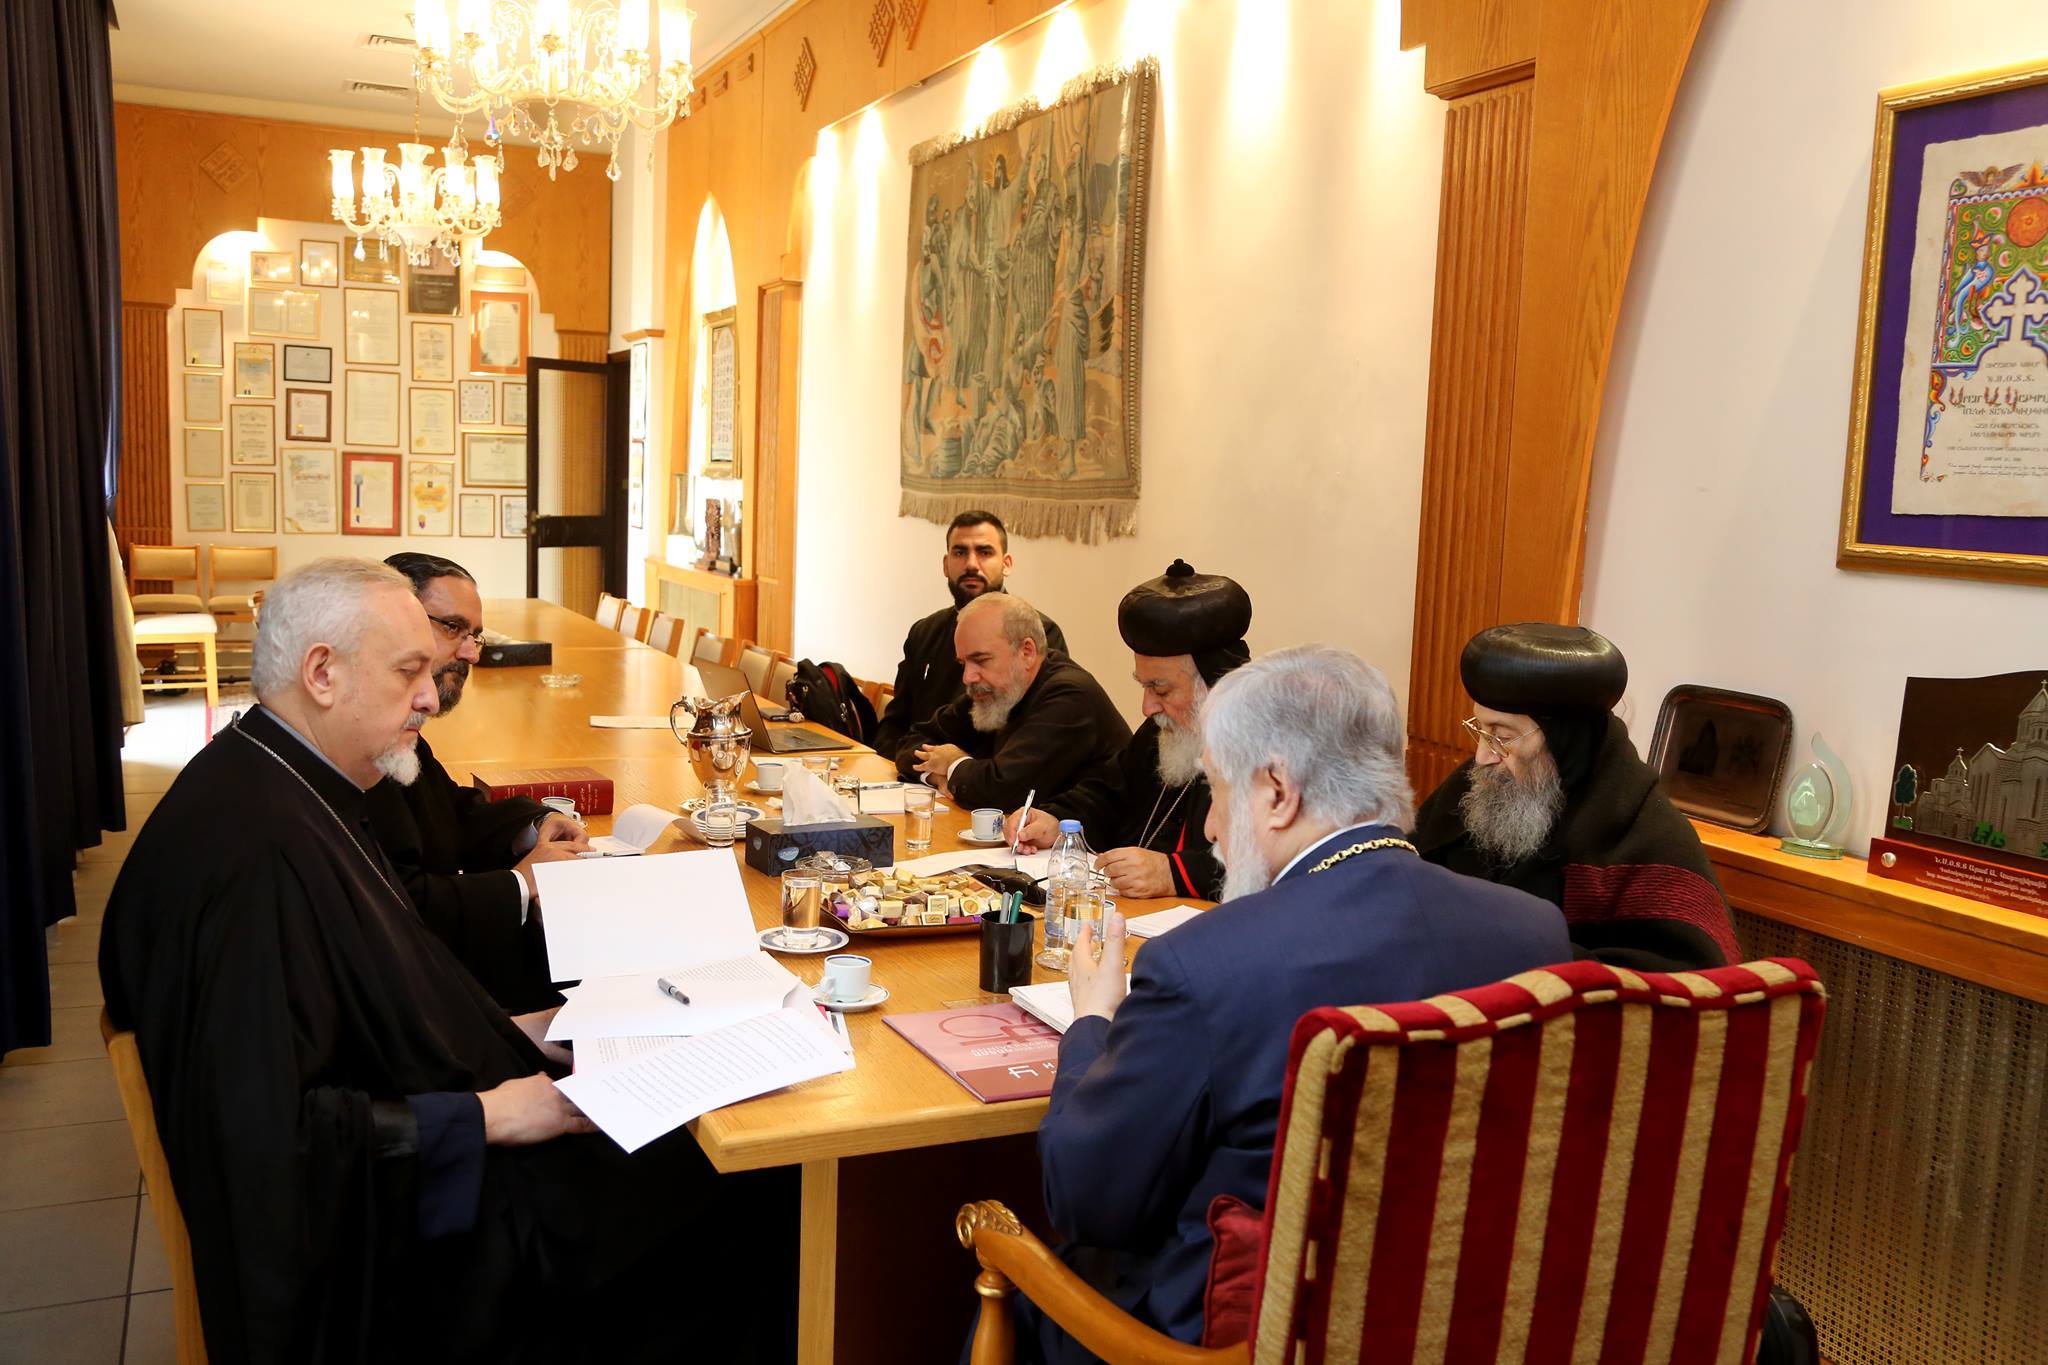 THE MEETING OF THE CO-CHAIRMEN OF THE DIALOGUE BETWEEN THE EASTERN ORTHODOX CHURCH AND ORIENTAL ORTHODOX CHURCHES IN ANTELIAS